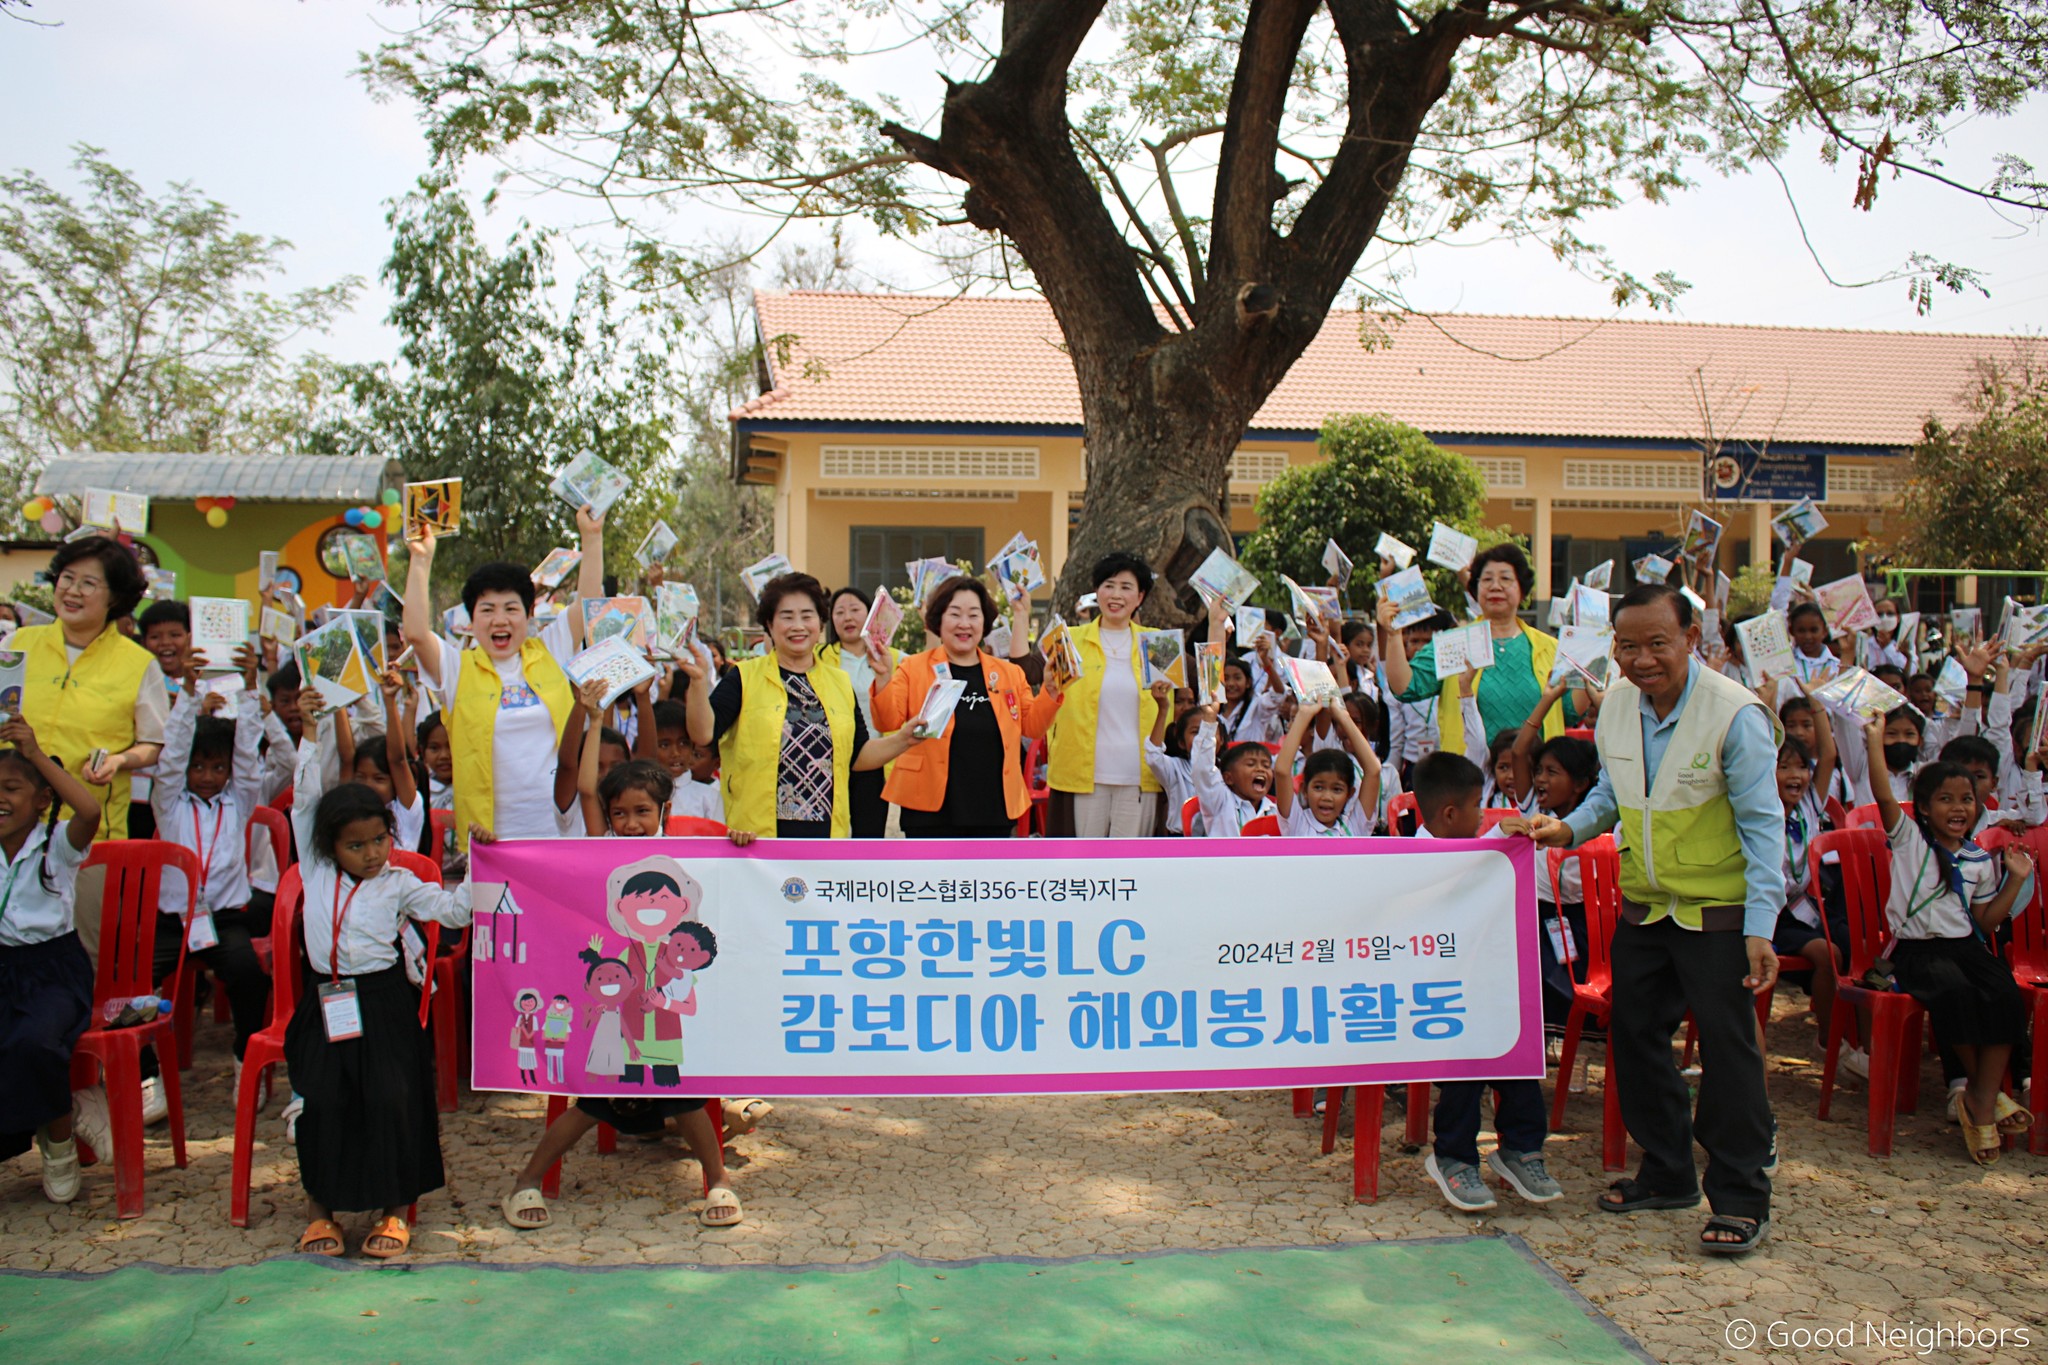 Good Neighbors Cambodia – Lions Club visited and handed over three Good Handwashing Stations to students in Ou Taki, Aek Phnom, and Krous Primary School